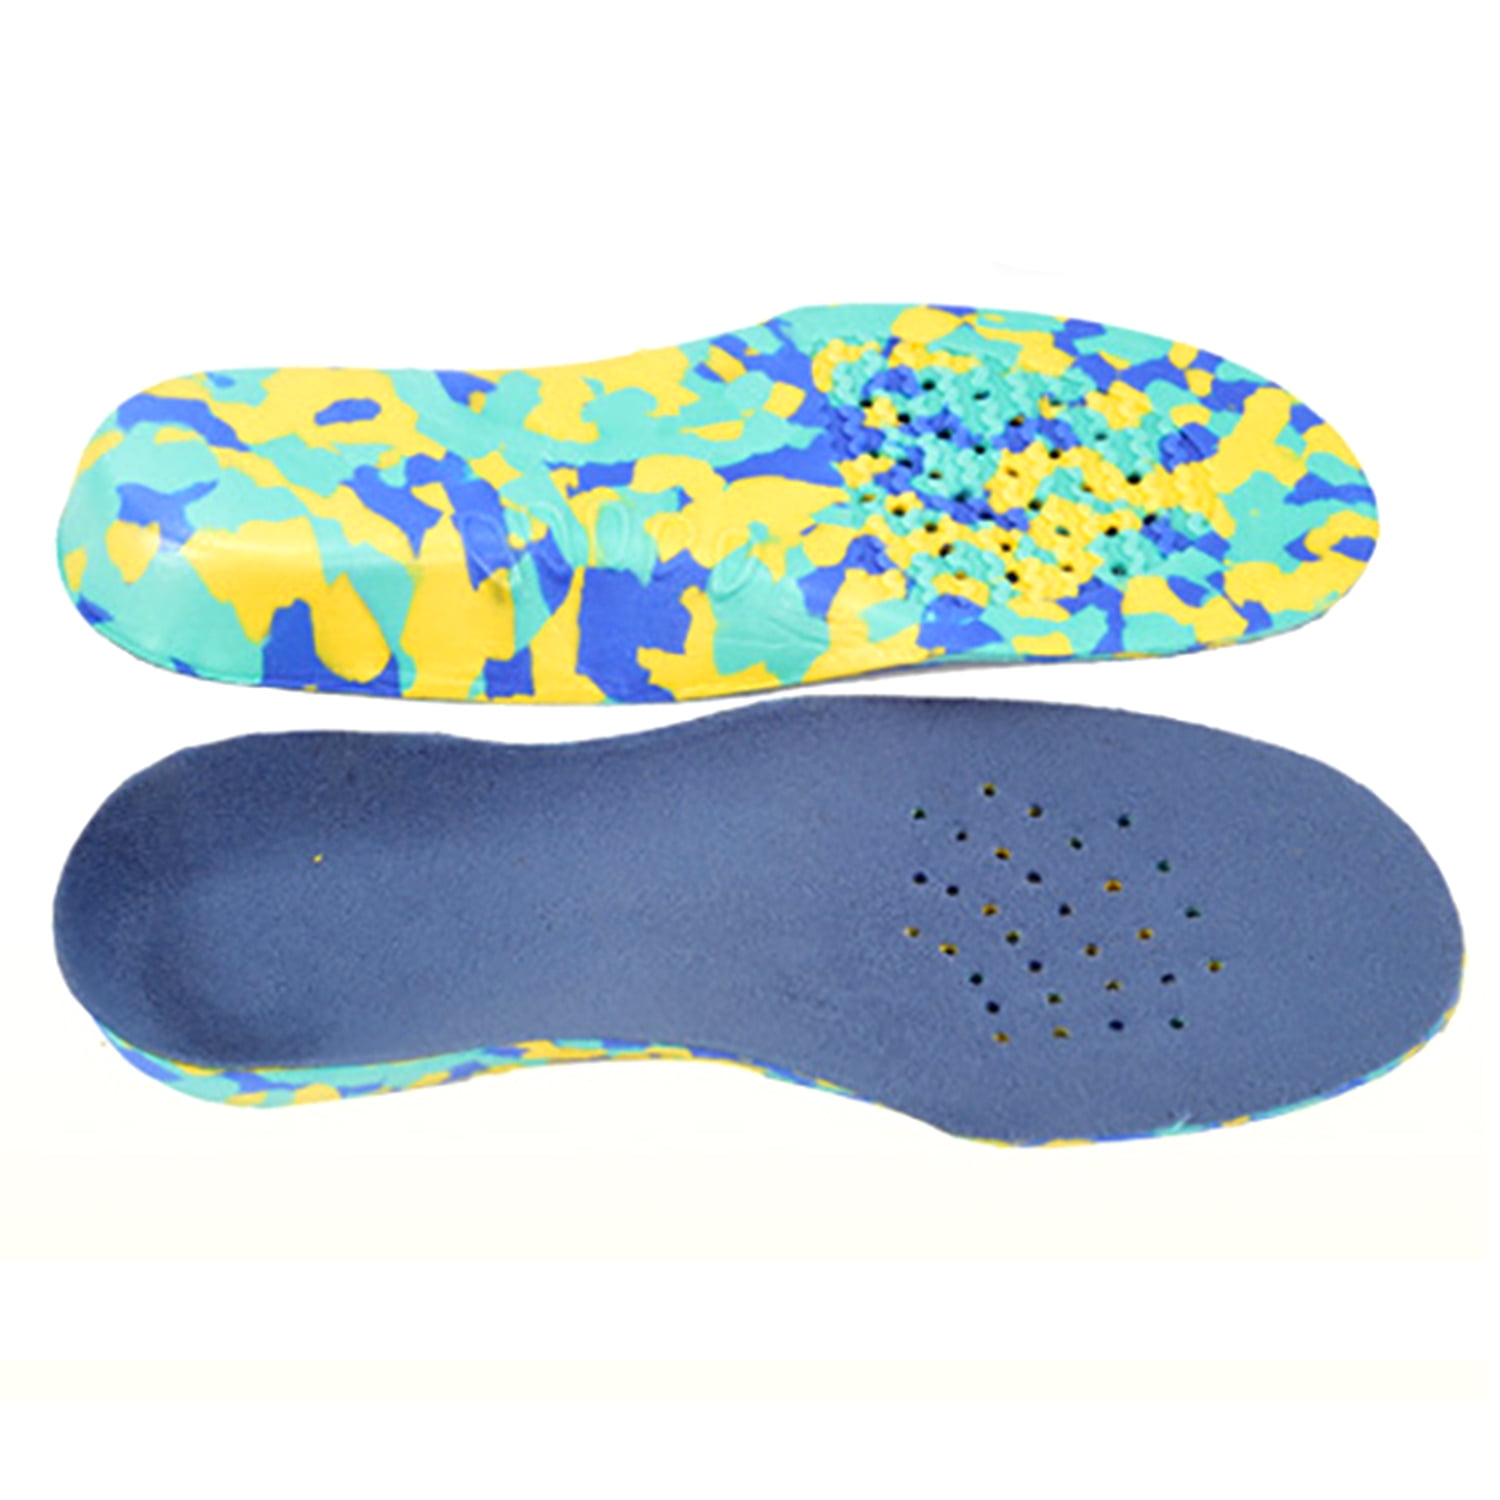 Actifresh Shoe Insoles Antibacterial Fresh Inserts Deo Active Dry and Comfort 